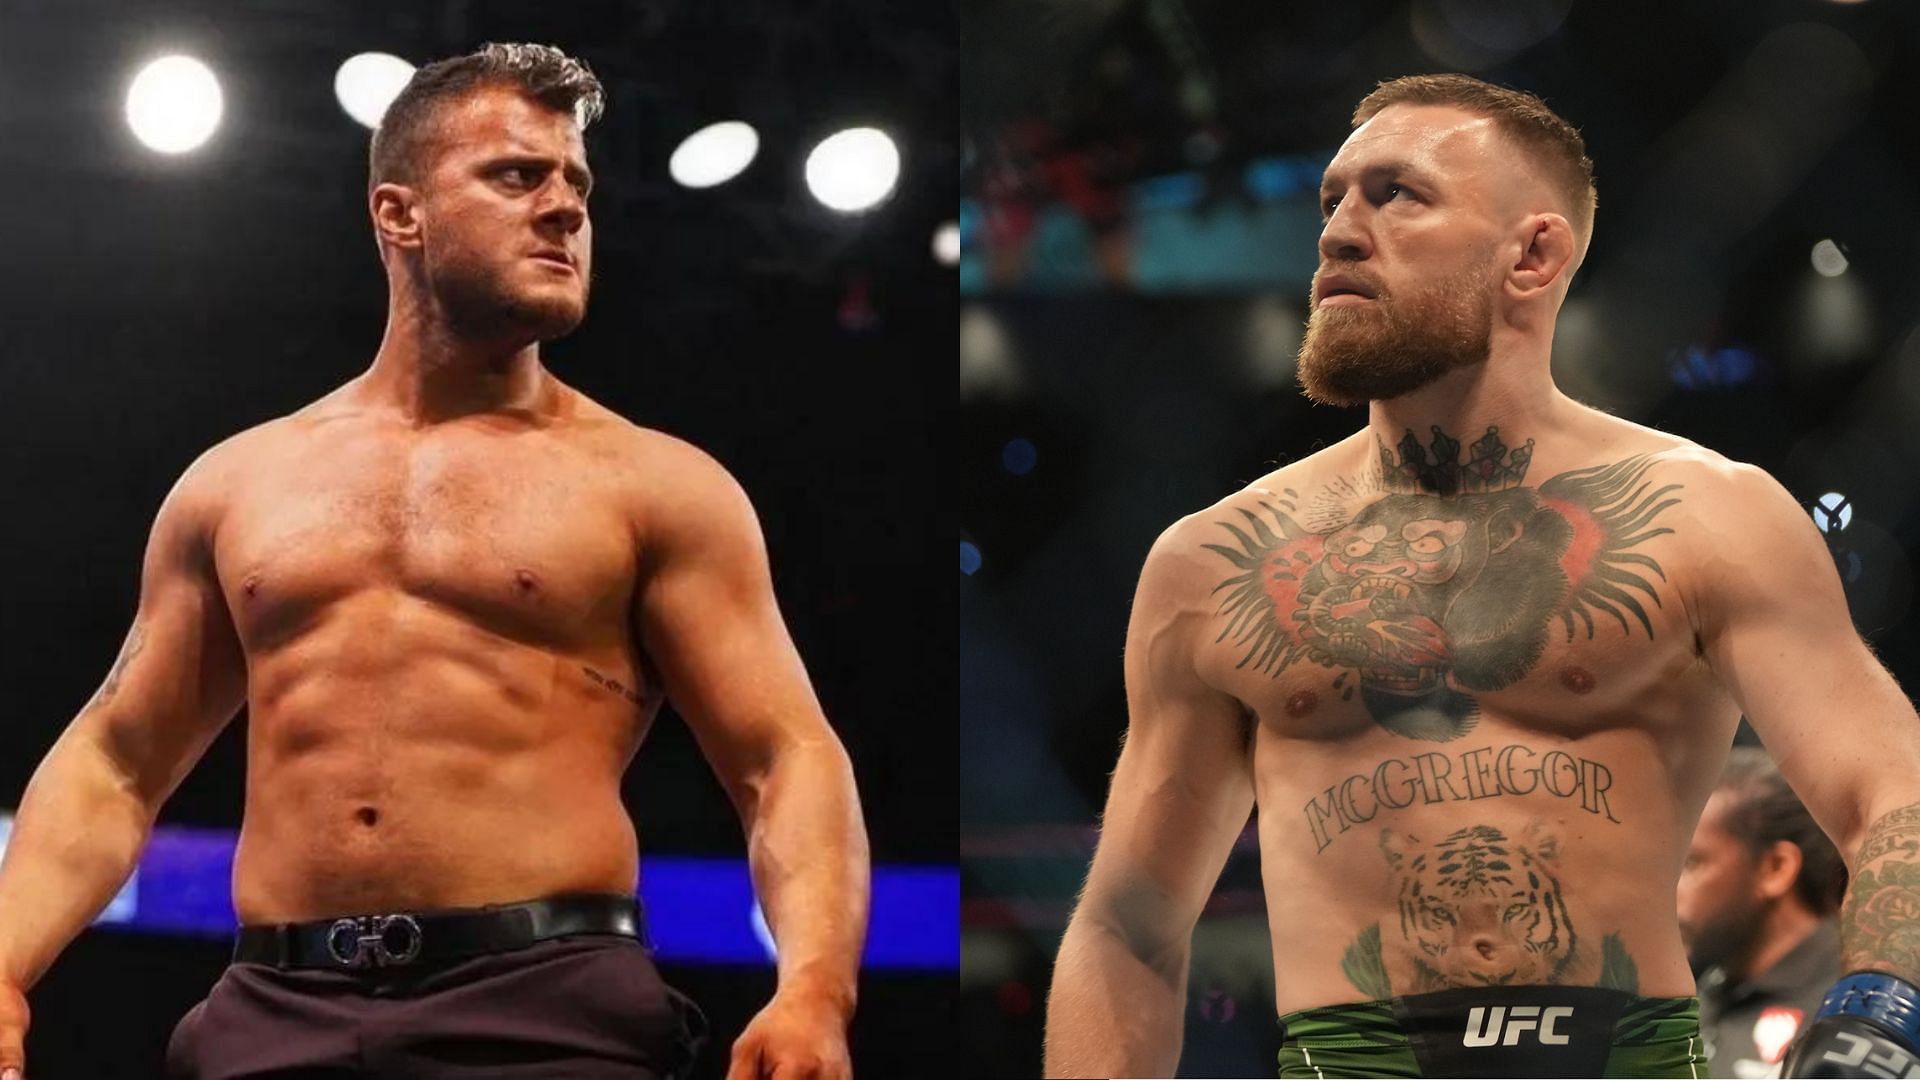 Sheamus recently took a shot at MJF by making a Conor McGregor reference